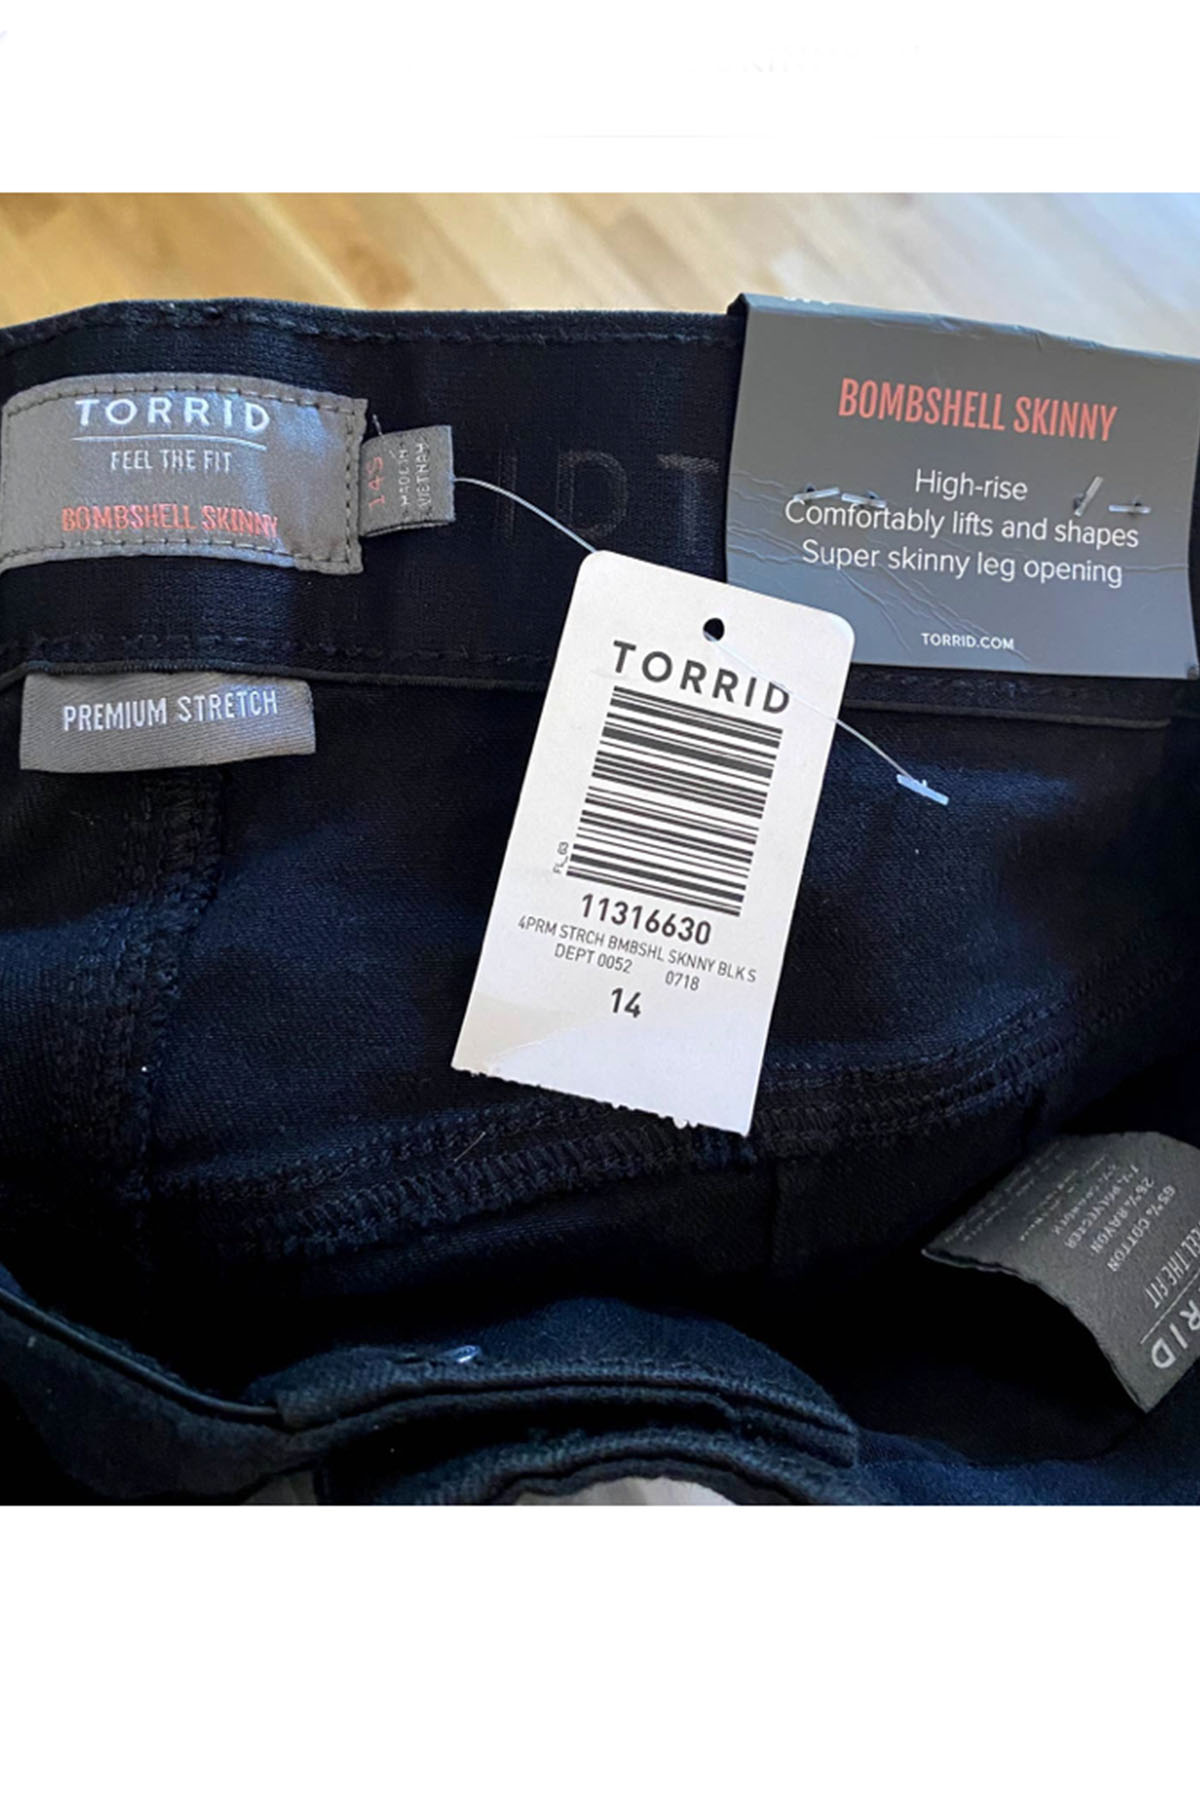 a close up picture of a pair of black torrid pants showing the brand tags.